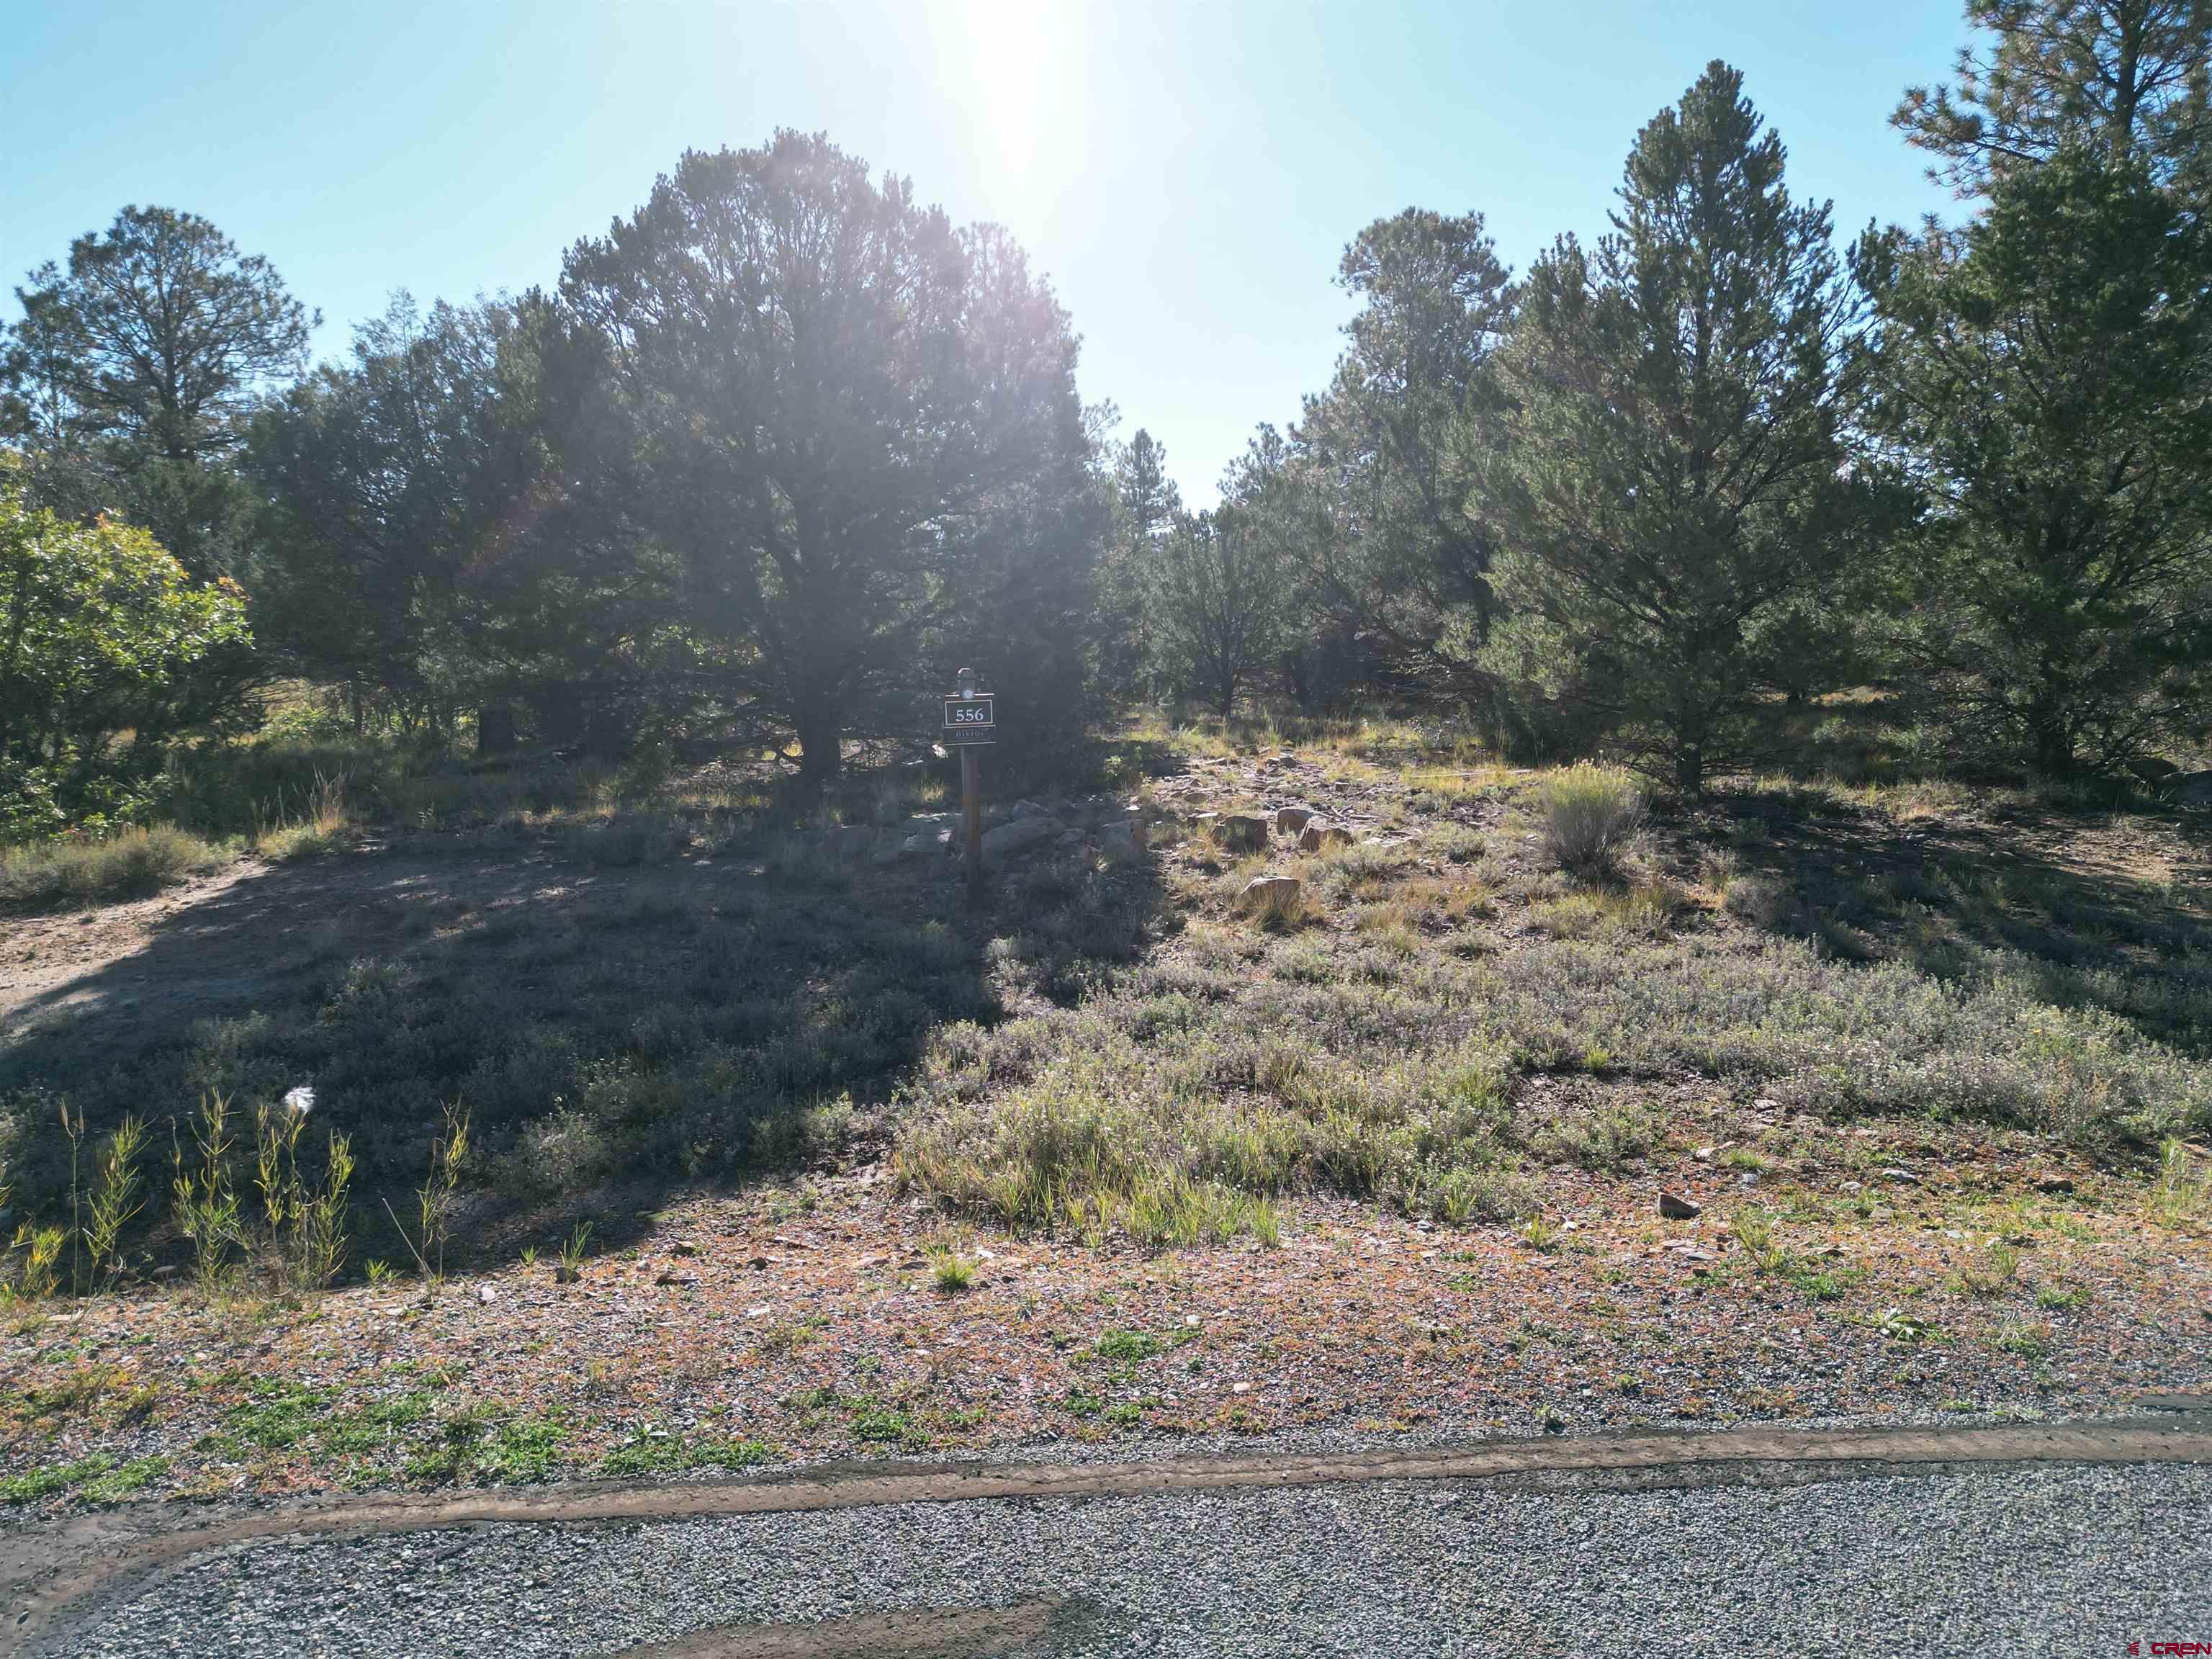 Escape to Divide Ranch & Club and enjoy all that this community has to offer with this amazing 0.920 acre lot. This beautiful lot is overlooking the Divide Ranch reservoir lake. Enjoy the 18 hole Award Winning Golf Course with its 8,600 square foot clubhouse that's a short golf cart ride away. Design and build your Colorado retreat on this beautiful lot with Ponderosa Pines and views of the surrounding mountain ranges and community lake. Located less than 8 miles to historic Ridgway known as the "Gateway to the San Juans" and where the original "True Grit" and "How the West was Won" movies were filmed. Other nearby attractions are Ouray which is known as the "Switzerland of America" and offers many hot springs for people to enjoy is just 10 miles away. The popular town of Telluride is an easy commute, a little over 30 miles away to enjoy world class skiing and summers full of cultural events and outdoor activities. Montrose Regional Airport is just 30 minutes away making it accessible to everyone. This is one of only a few developer serviced lots which includes paid water and sewer taps. A one time mandatory membership initiation fee of $15,000 for the Divide Ranch & Club is due at time of closing.